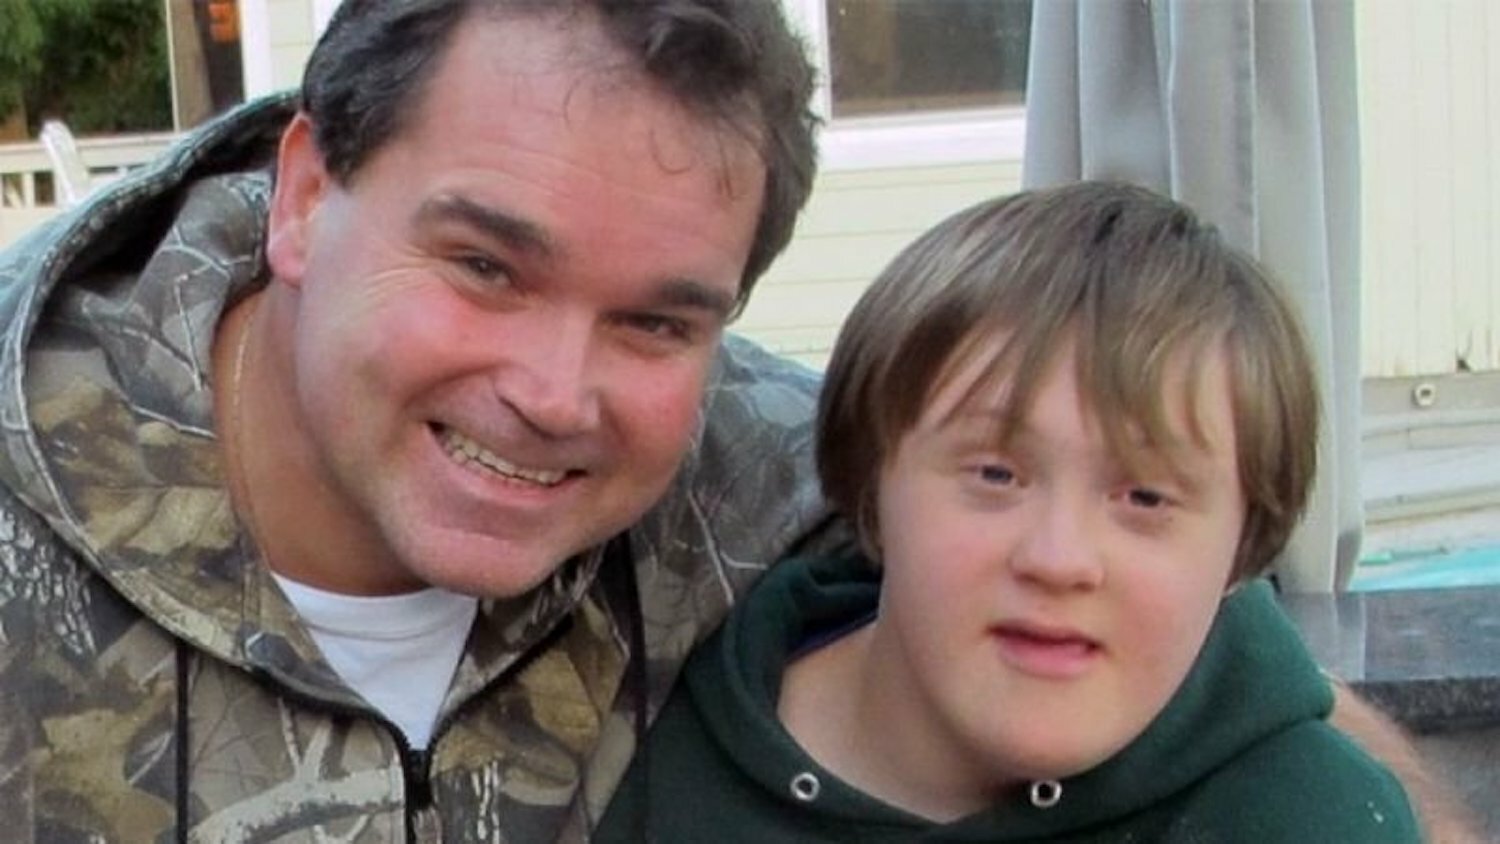 Christian Killoran and his son, Aiden, who has Down syndrome, have fought the Westhampton Beach School District with lawsuits since 2015 to allow the now 19-year-old to be integrated into his home district. KILLORAN FAMILY